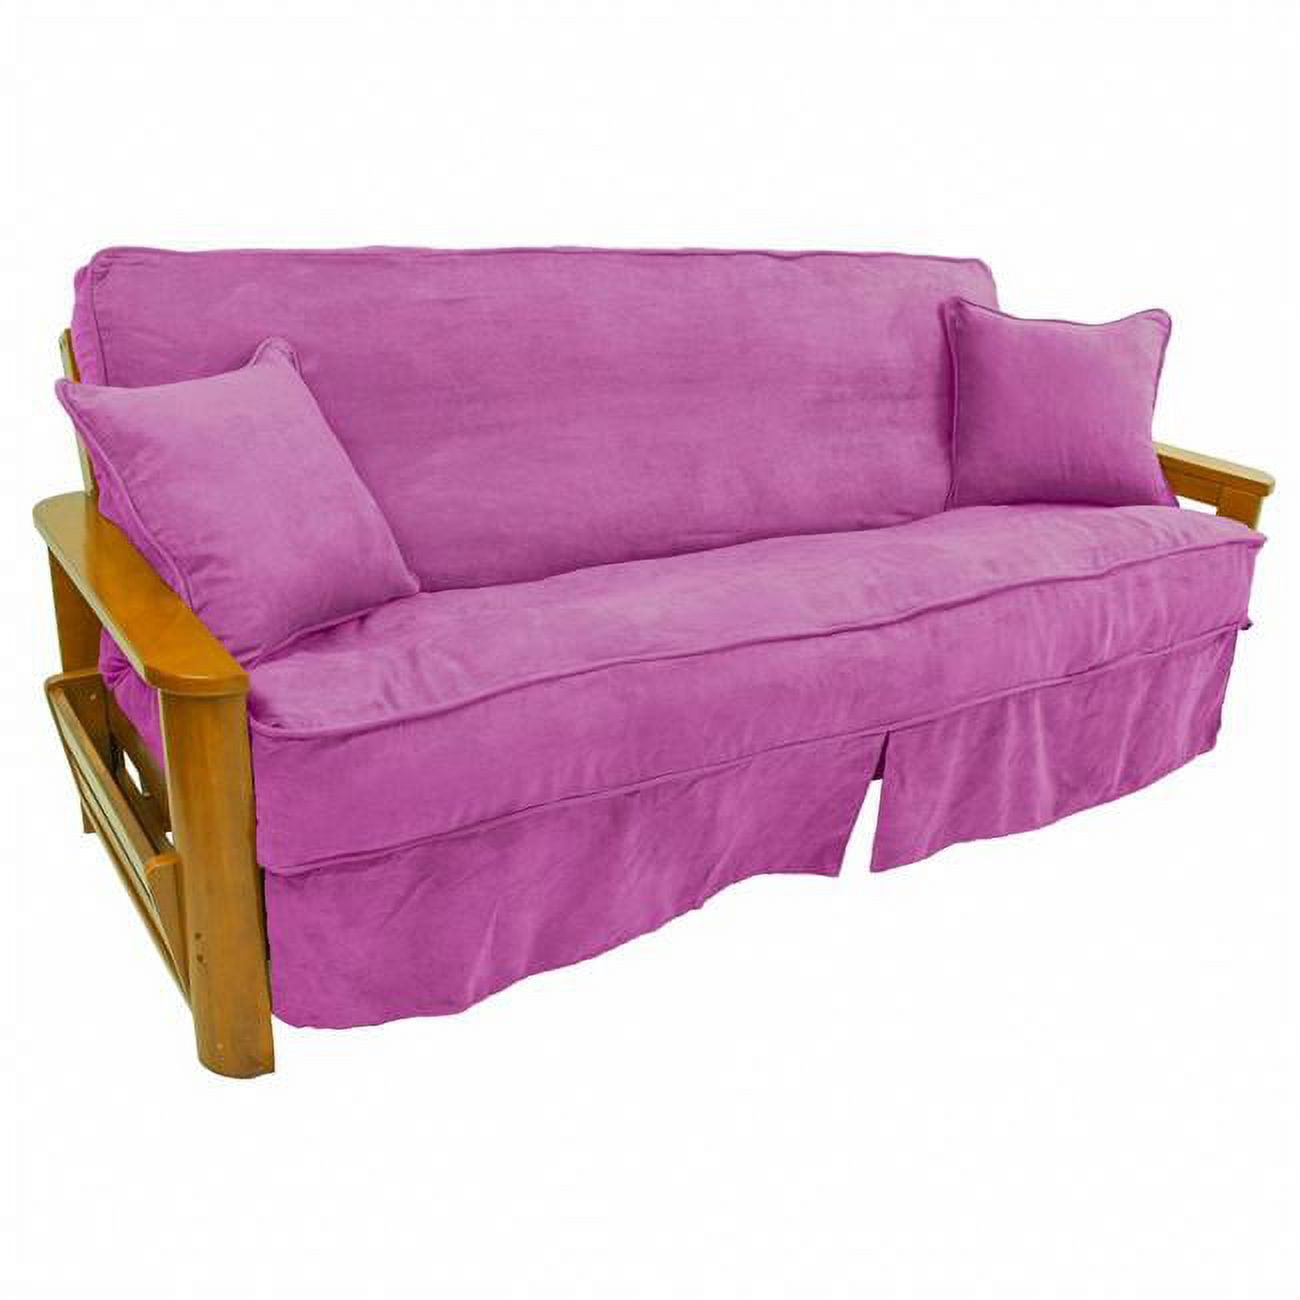 Picture of Blazing Needles 9671-CD-MS-UV 8 to 9 in. Solid Microsuede Double Corded Full Futon Slipcover Set with Two 18 in. Throw Pillows, Ultra Violet - Set of 3